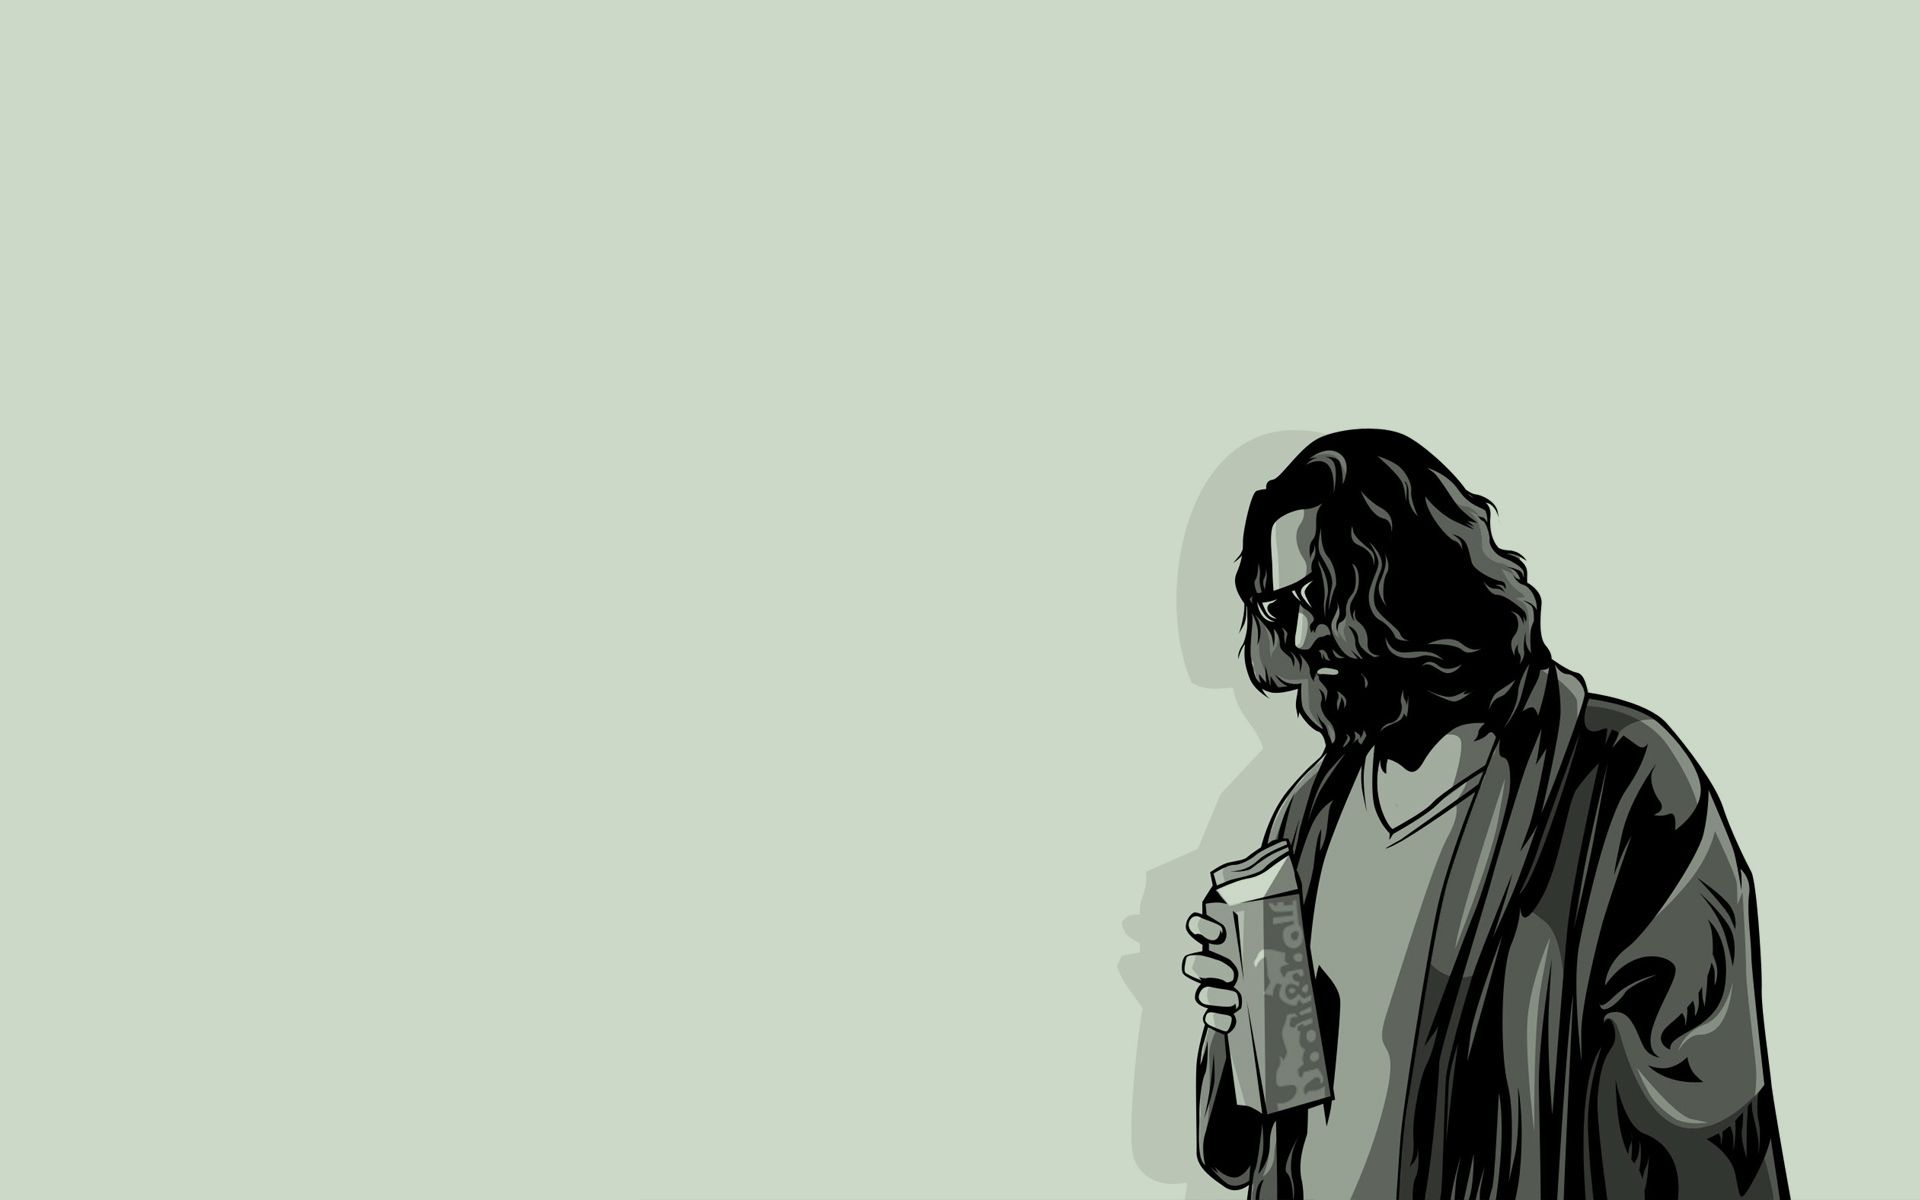 My current wallpaper, The Dude